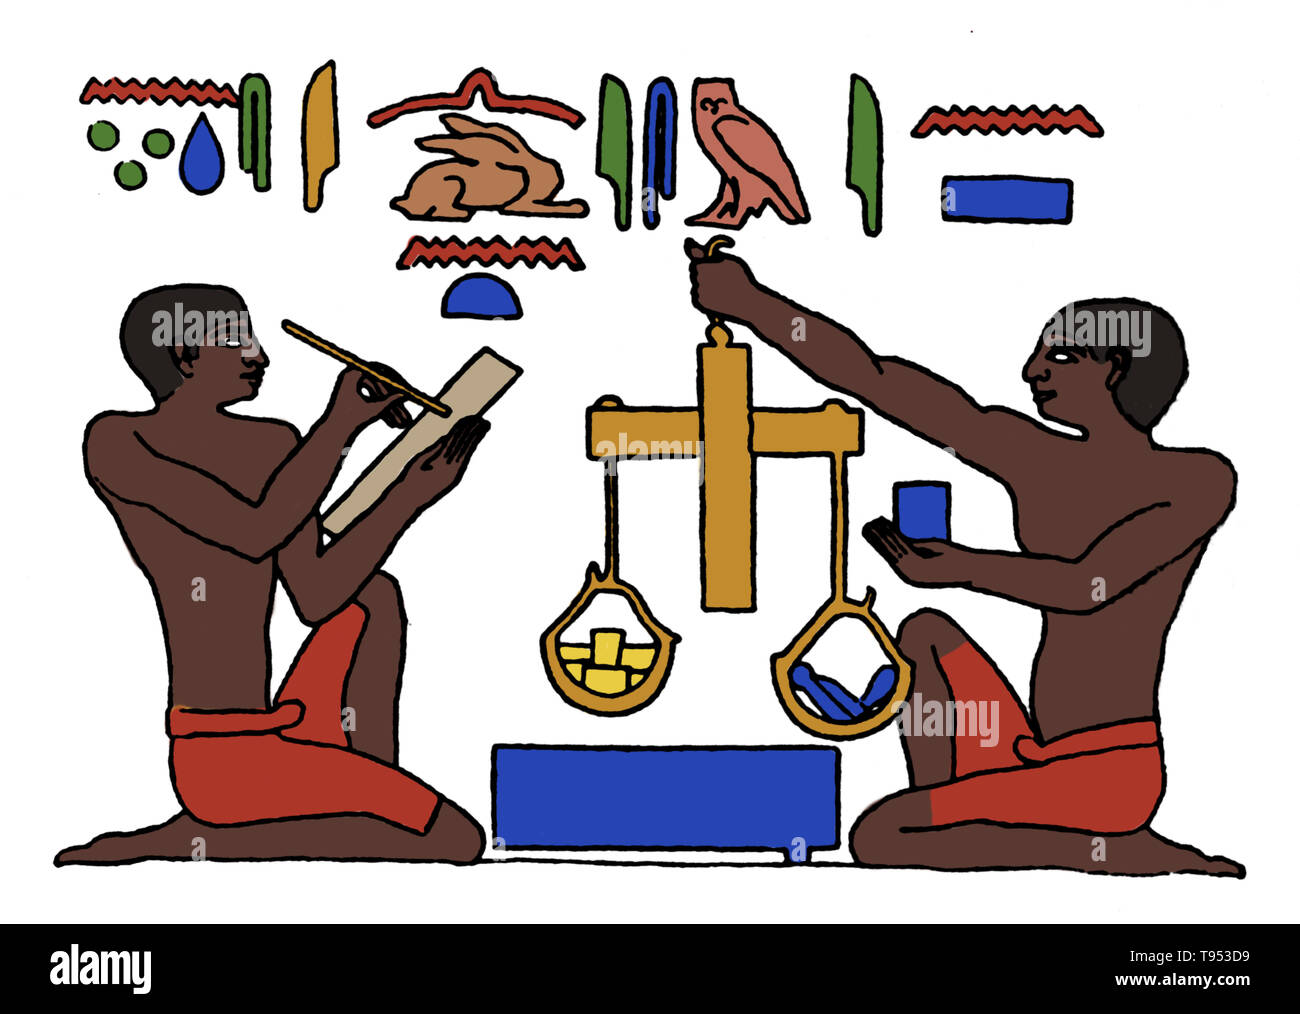 Weights and measures were among the earliest tools invented by man. Early Babylonian and Egyptian records, and the Bible, indicate that length was first measured with the forearm, hand, or finger and that time was measured by the periods of the sun, moon, and other heavenly bodies. When it was necessary to compare the capacities of containers such as gourds or clay or metal vessels, they were filled with plant seeds that were then counted to measure the volumes. Stock Photo